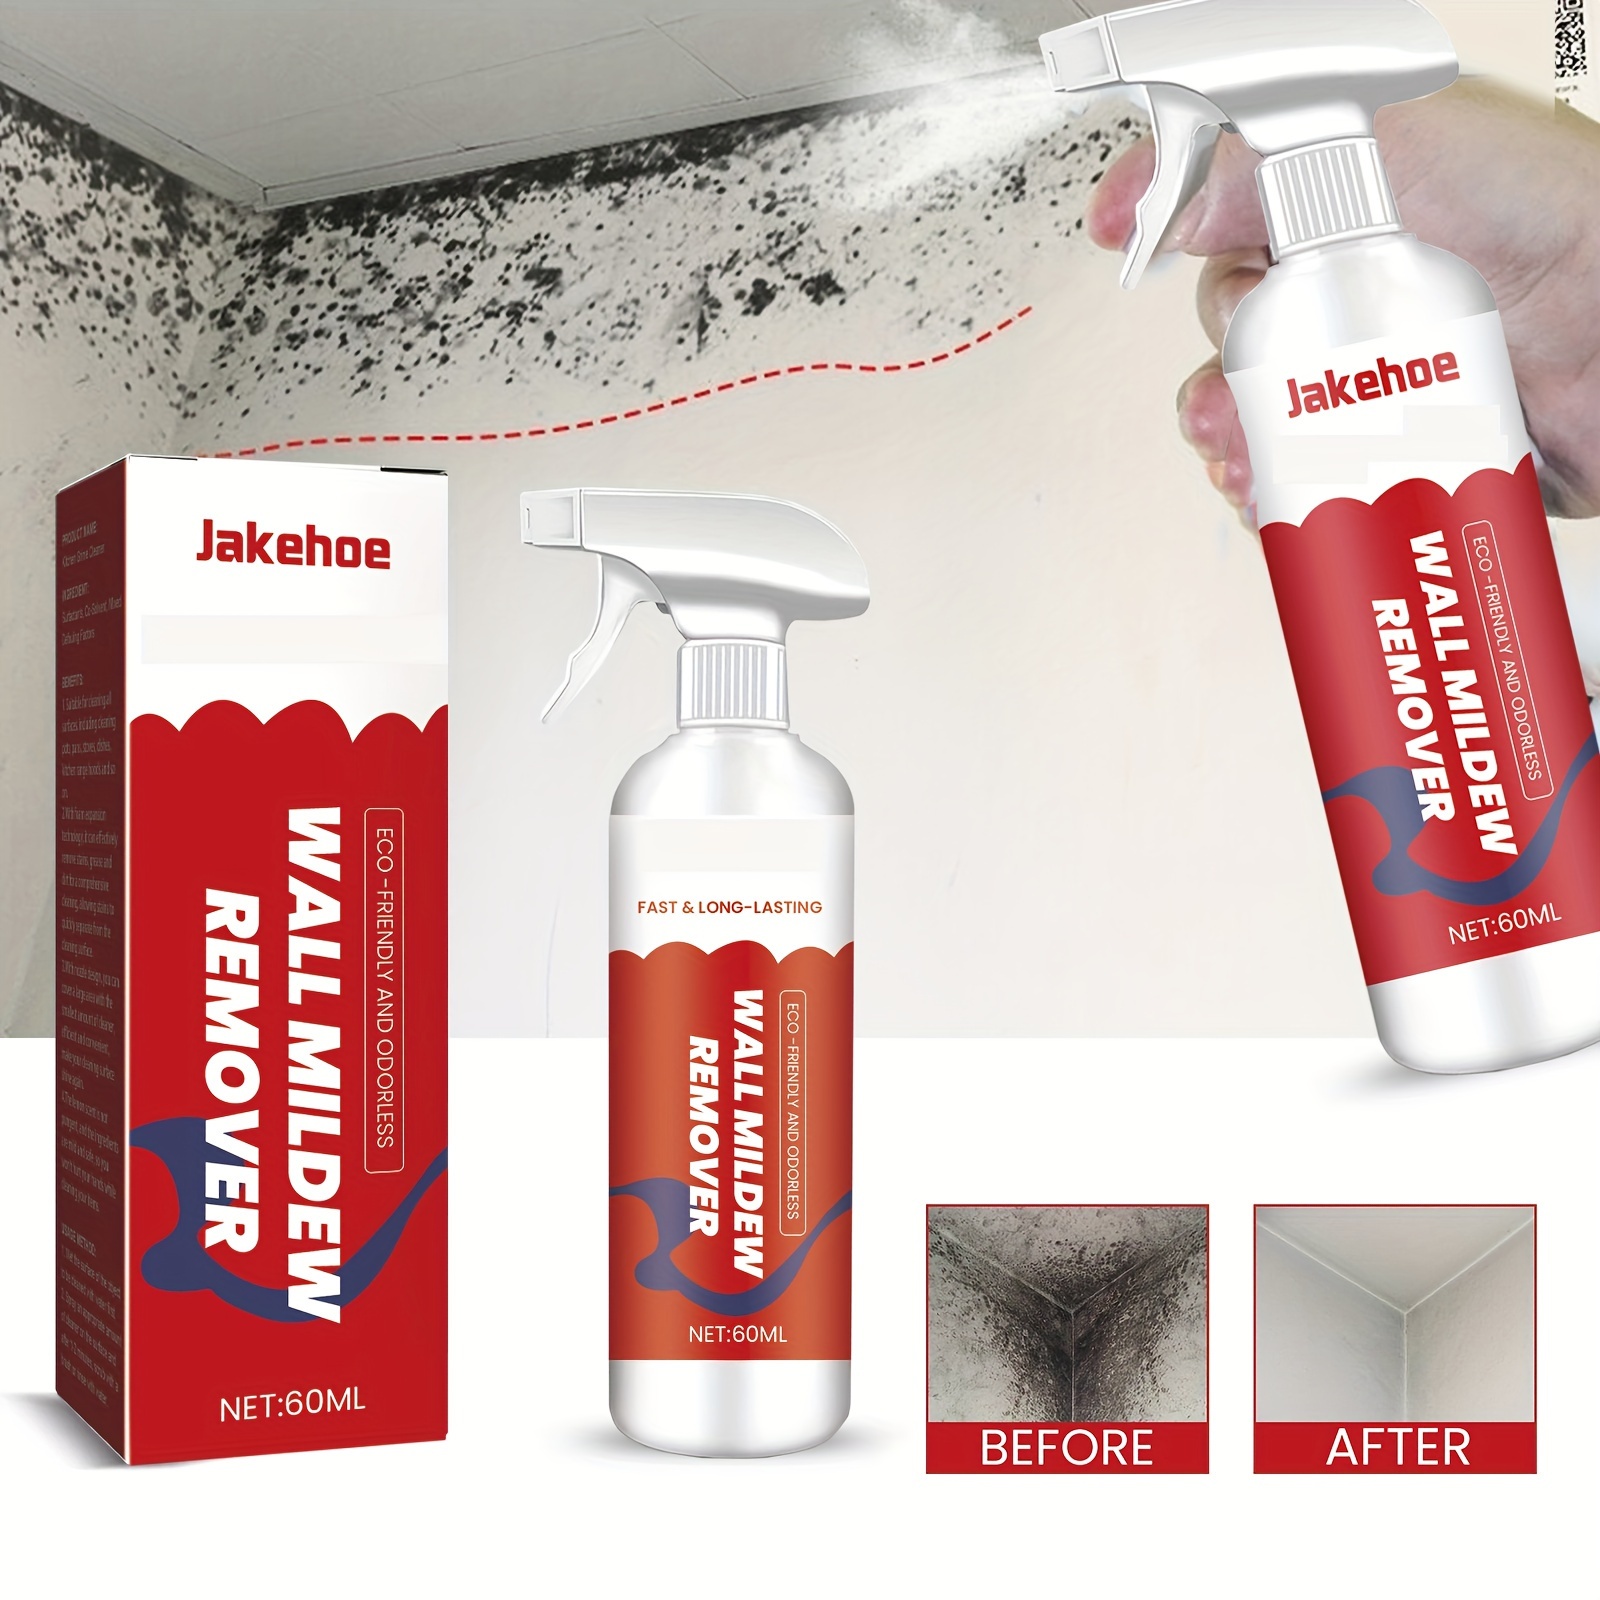 WillNature® Natural Mould Remover (Mold Cleaner) - WillShop®